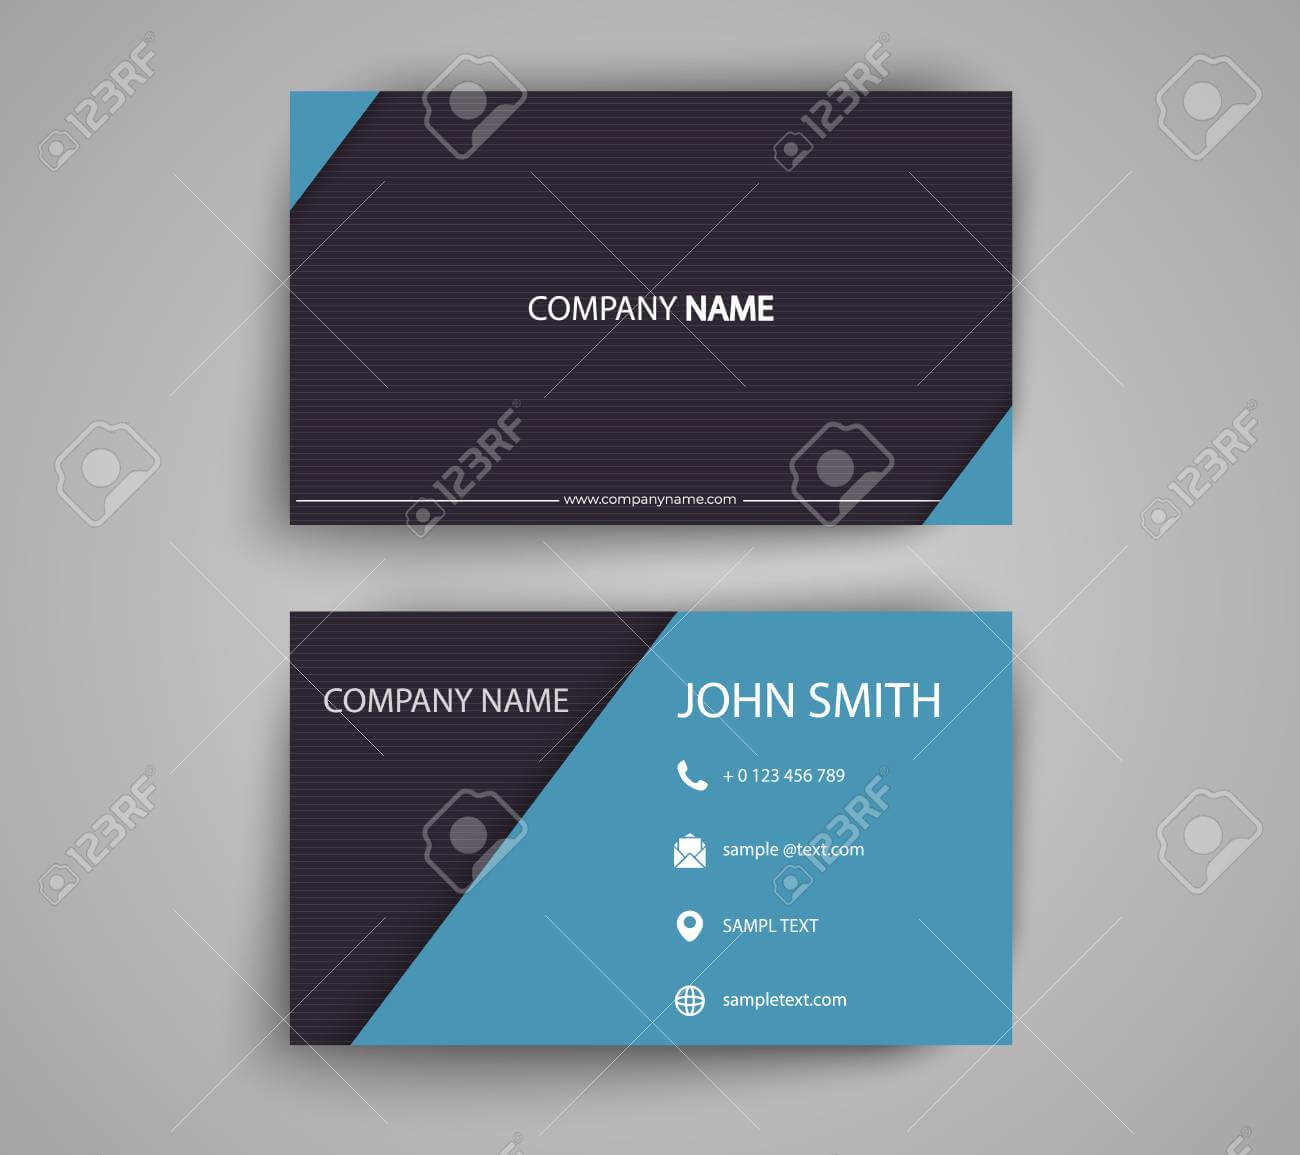 012 Template Ideas Creative Double Sided Business Card In 2 Sided Business Card Template Word